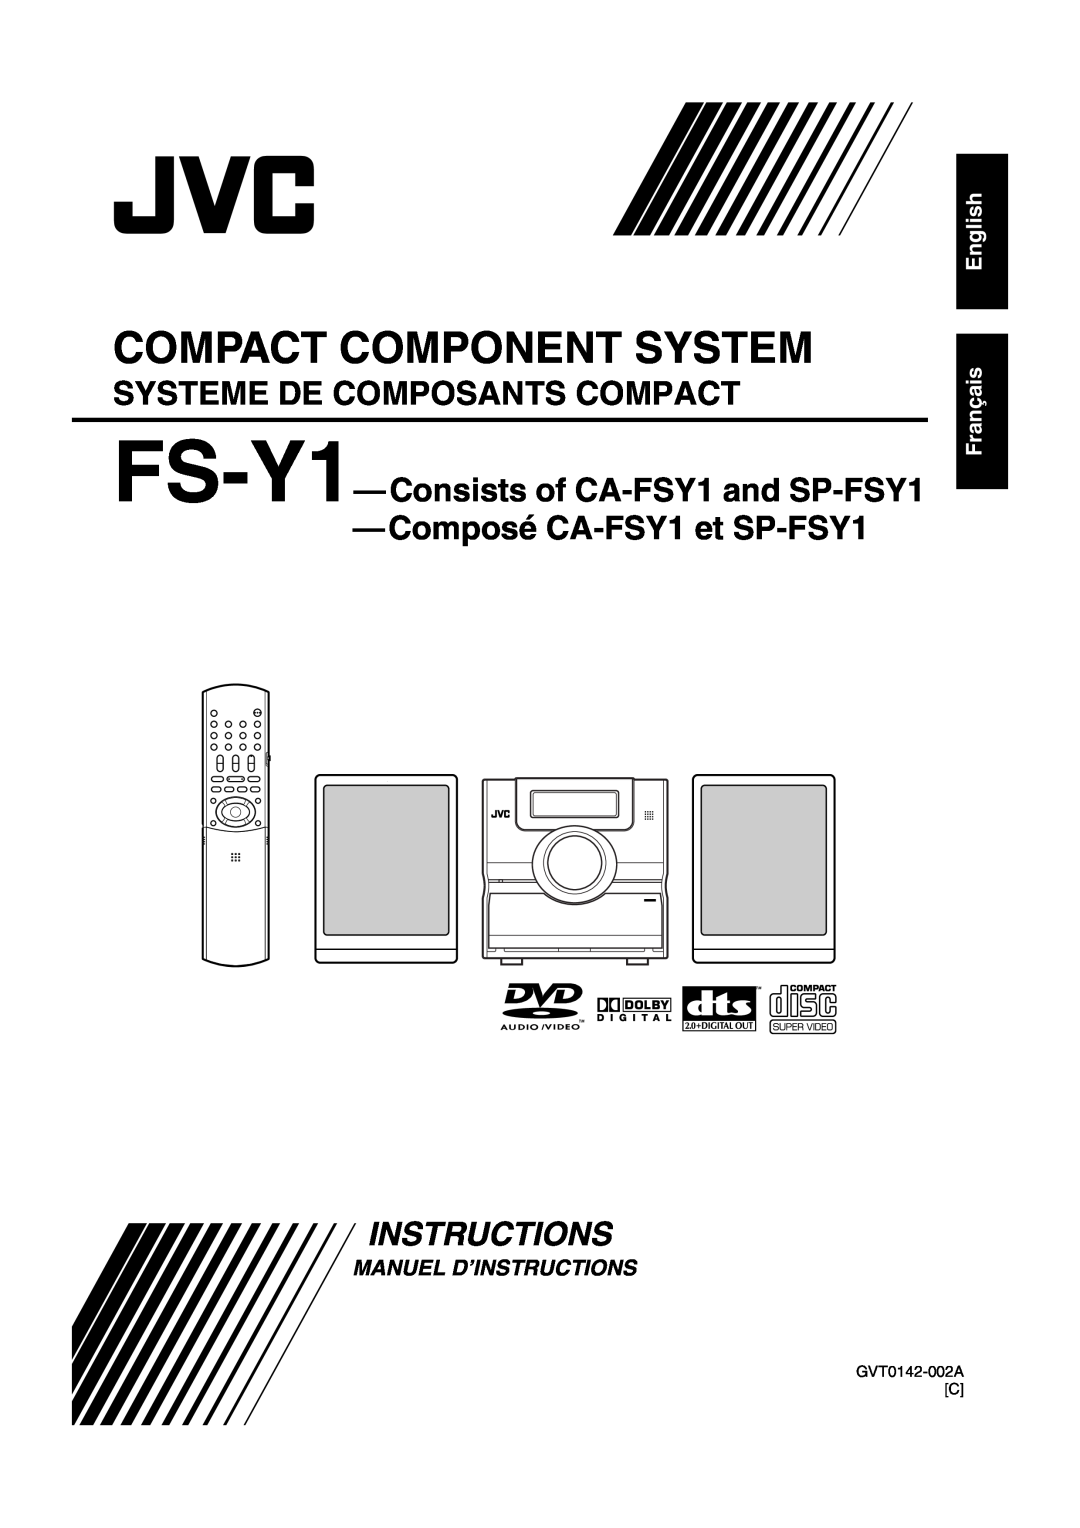 JVC GVT0142-001A manual Systeme De Composants Compact, FS-Y1—Consistsof CA-FSY1and SP-FSY1, Composé CA-FSY1et SP-FSY1 